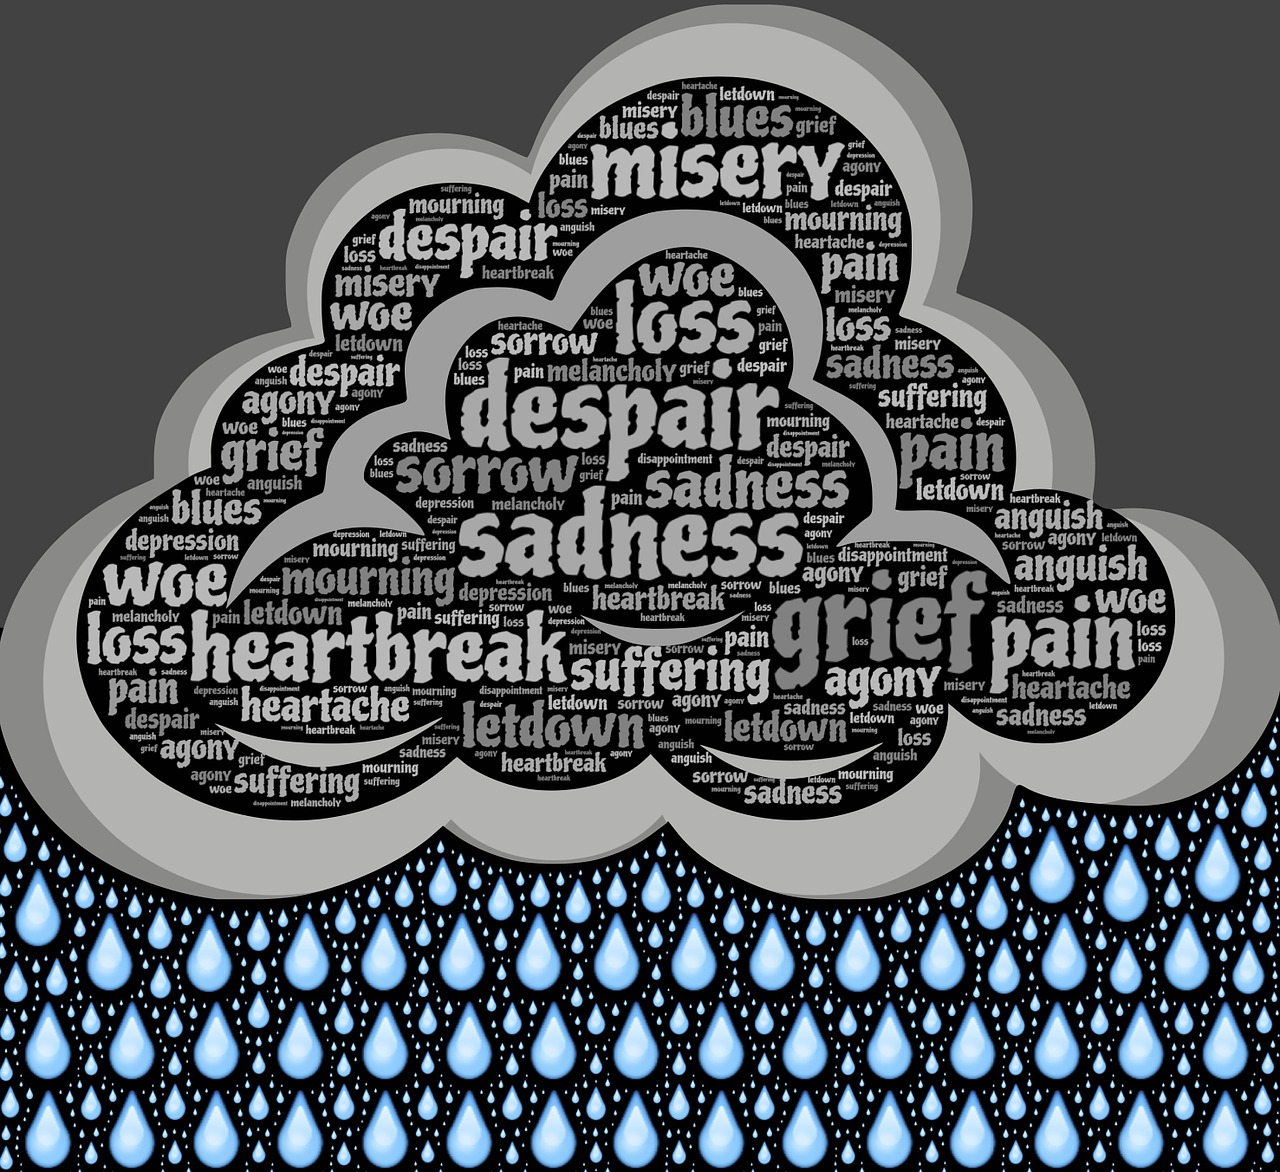 image of word cloud including sadness, heartbreak, grief, suffering, pain, woe, misery...